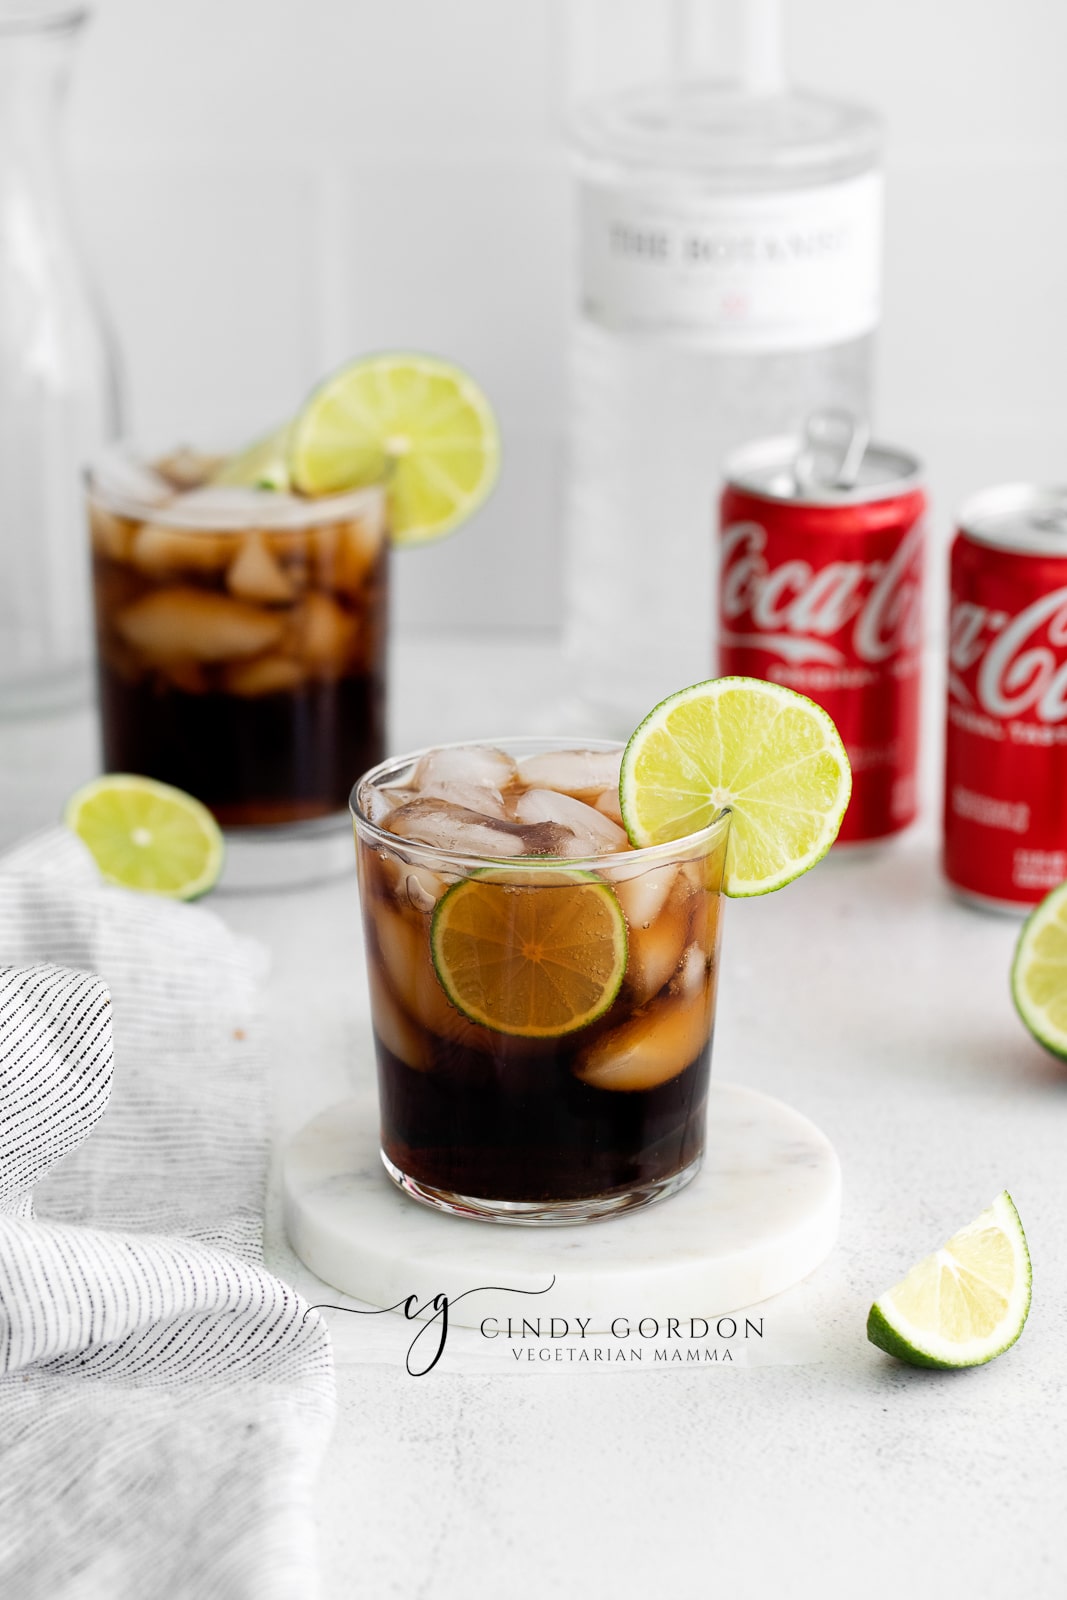 two short clear glasses full of hale moon ice cubes. Brown liquid in glasses with lime wheel on top of glasses. Coke a cola cans in back ground with cut limes and towel to the left. Bottle of gin in the background